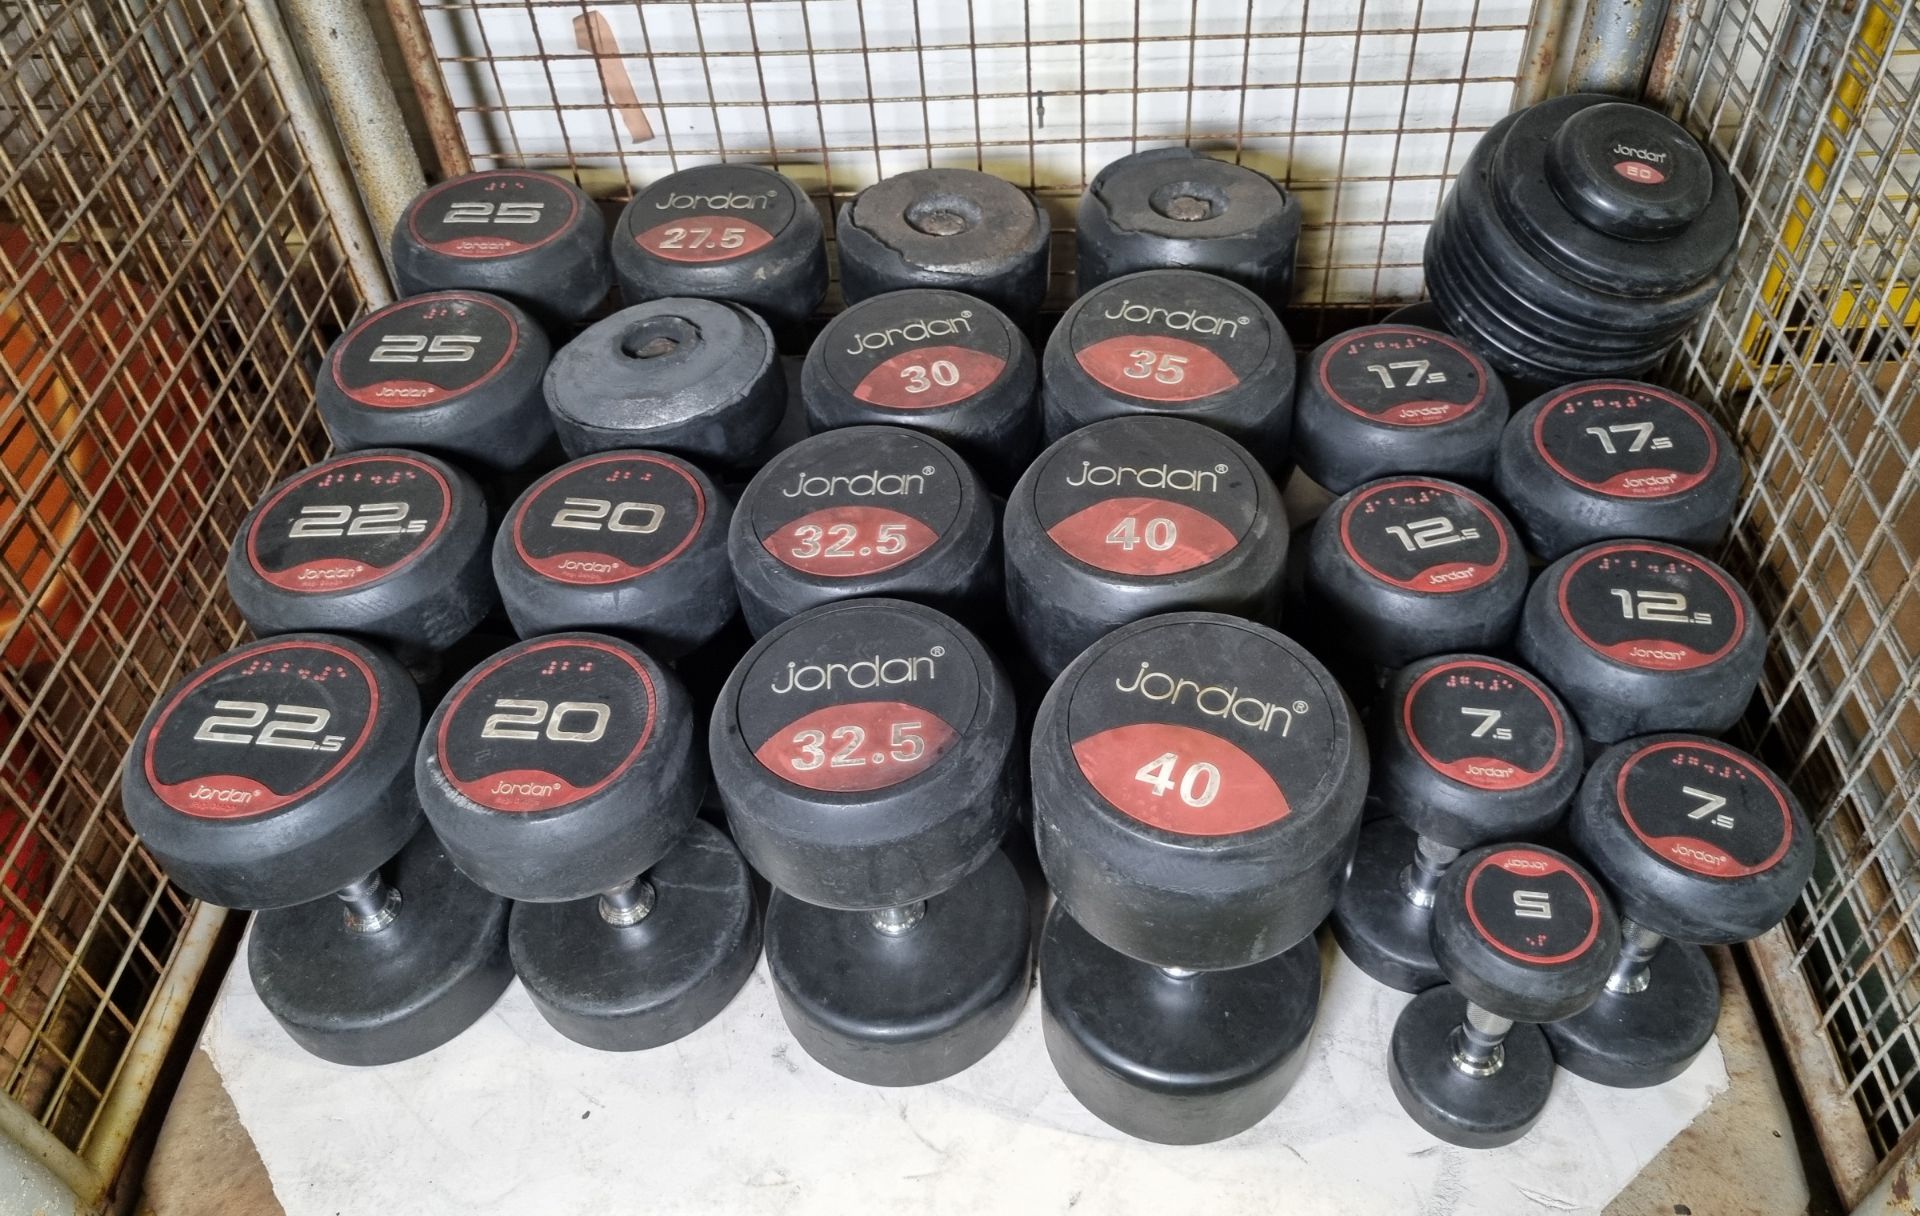 Jordan dumbbell weights ranging from 5Kg to 50Kg - some pairs incomplete - see pictures for weights - Image 2 of 4